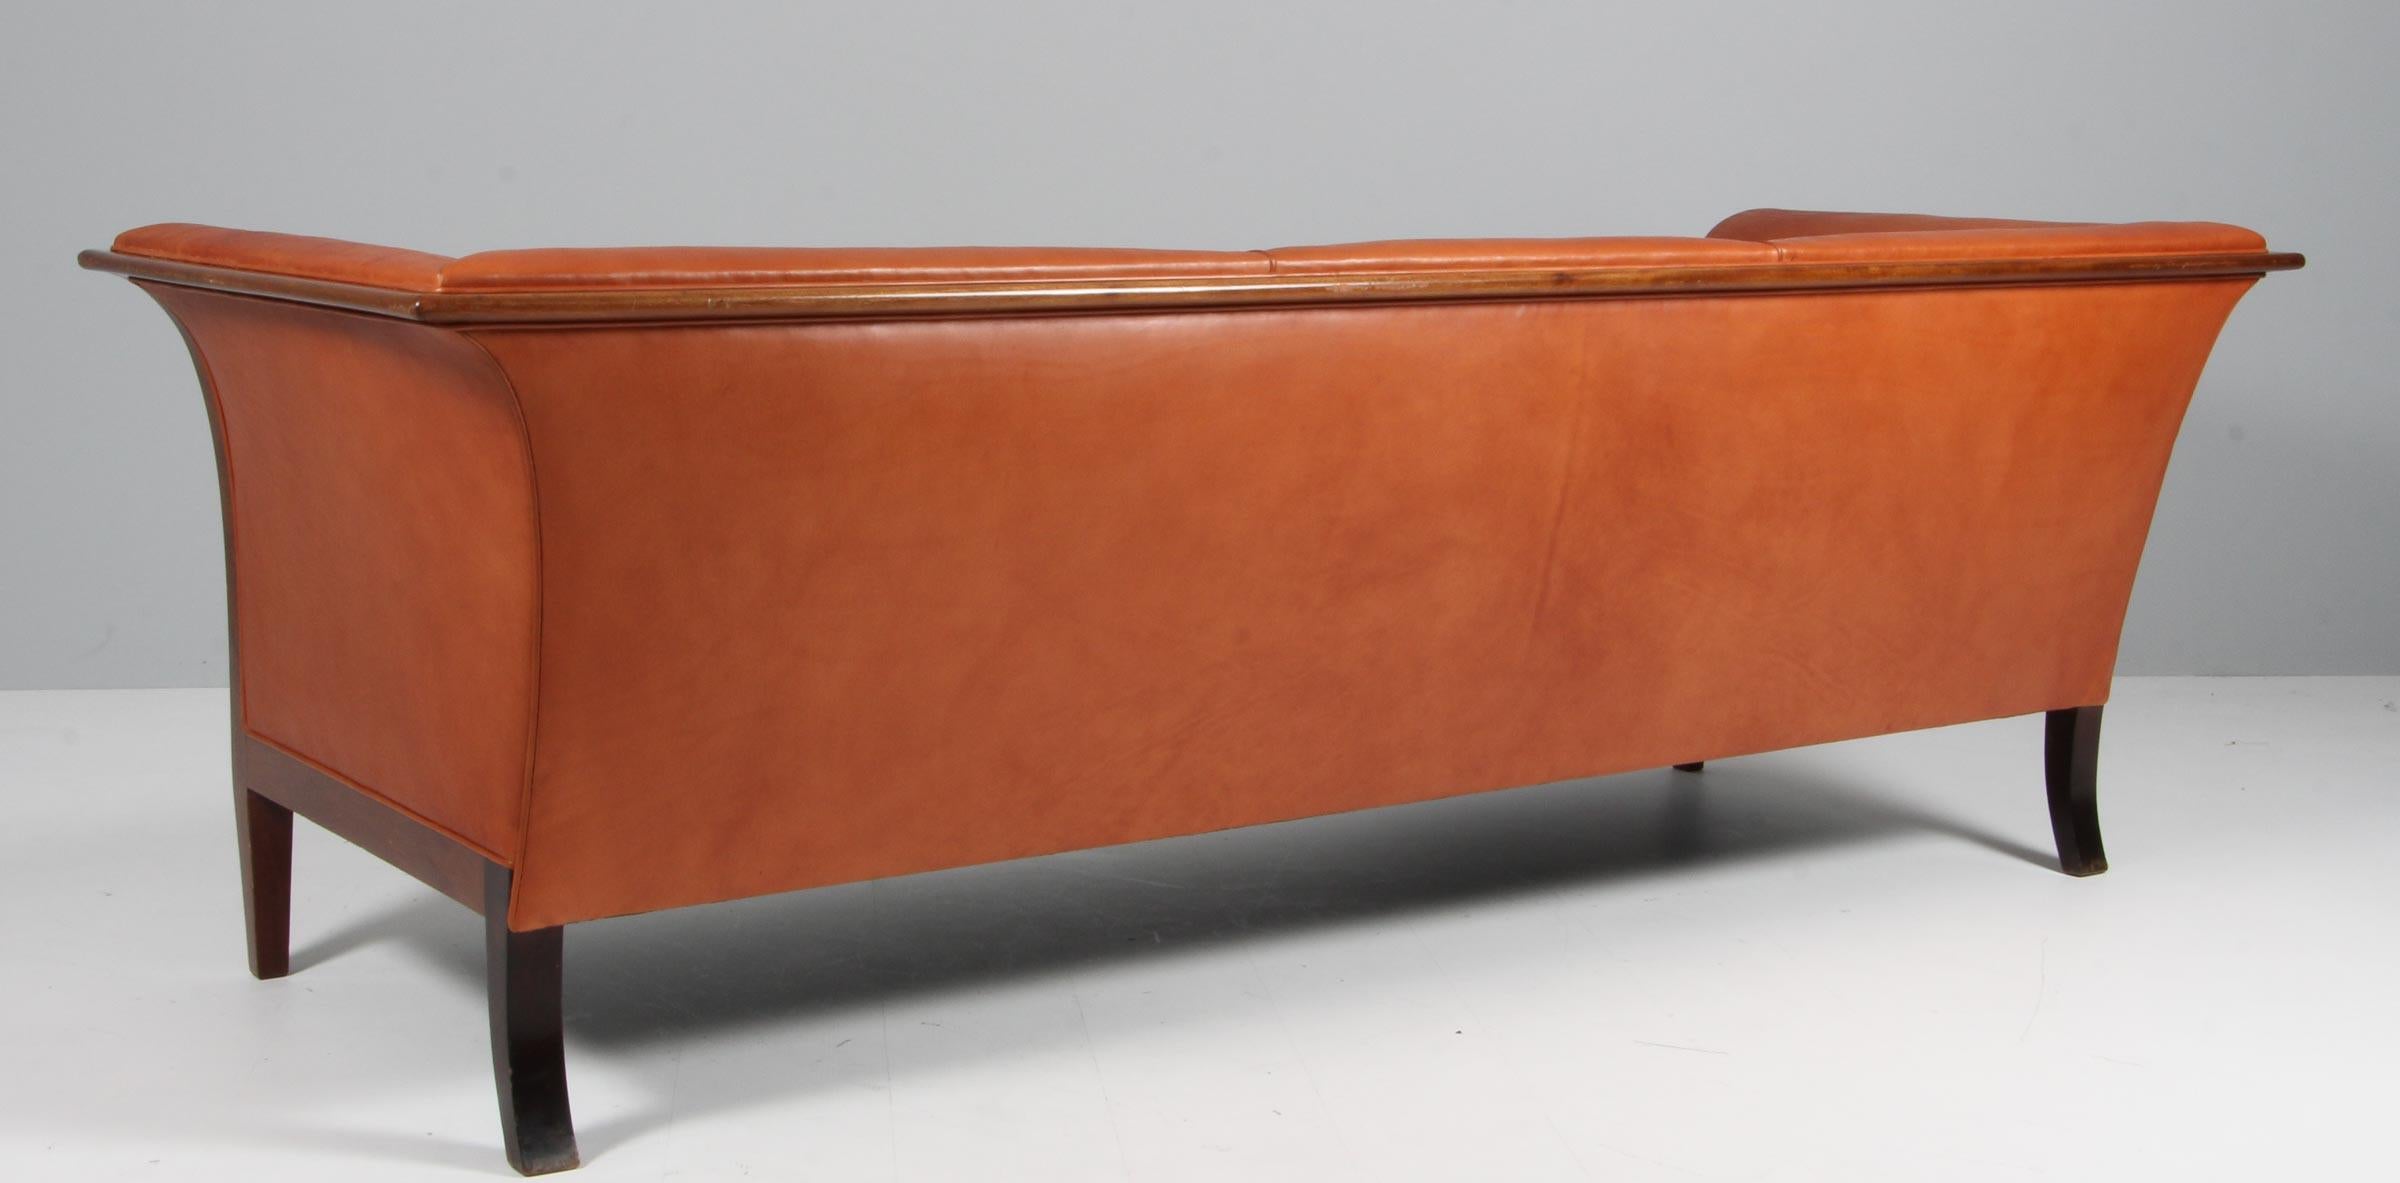 Frits Henningsen three seat sofa new upholstered with brandy coloured aniline leather

Frame of mahogany. 

Made in the 1940s. 
 